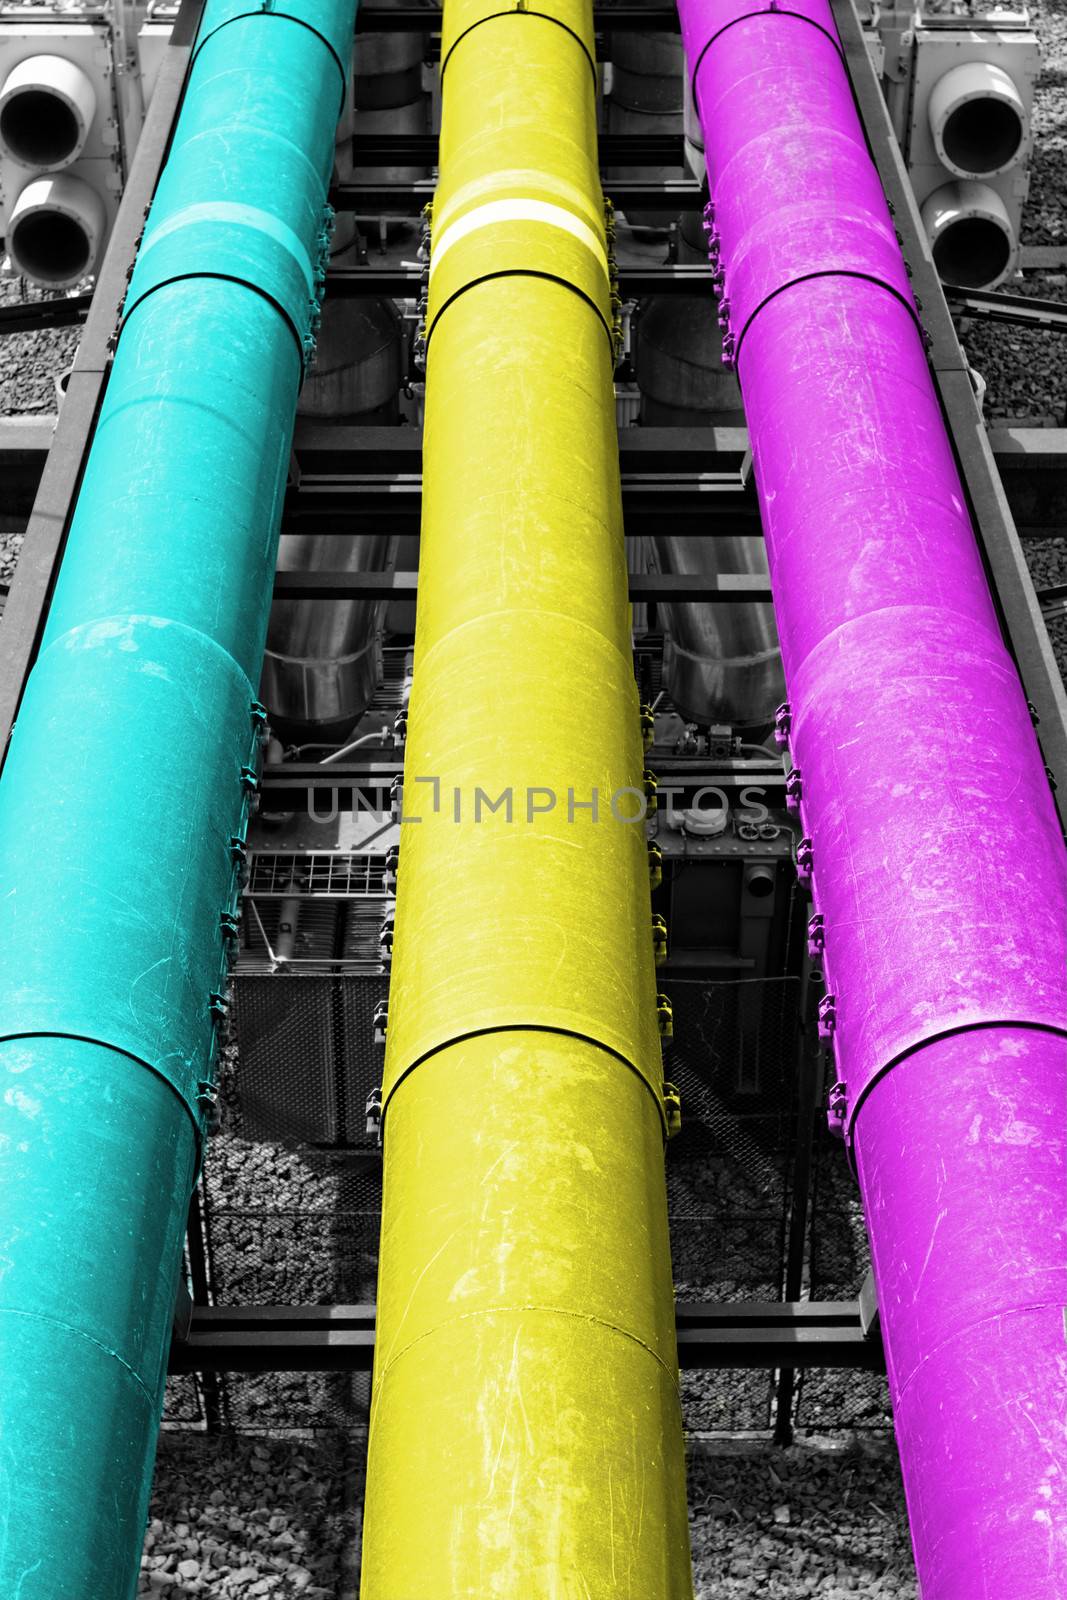 industrial pipes in a electricity power plant (CMY colors)